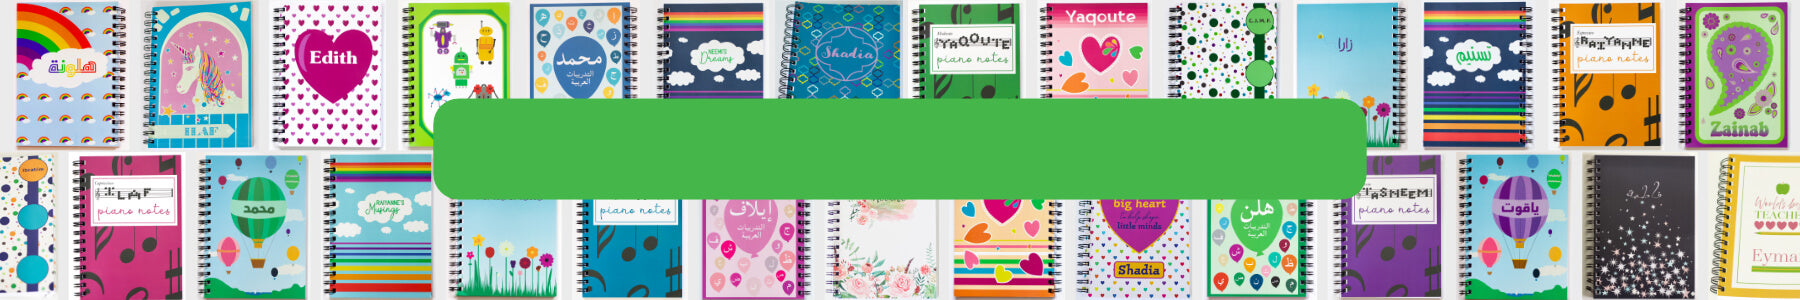 Banner showing Haluna Happy Names personalised notebooks available in a bunch of fun colourful designs 